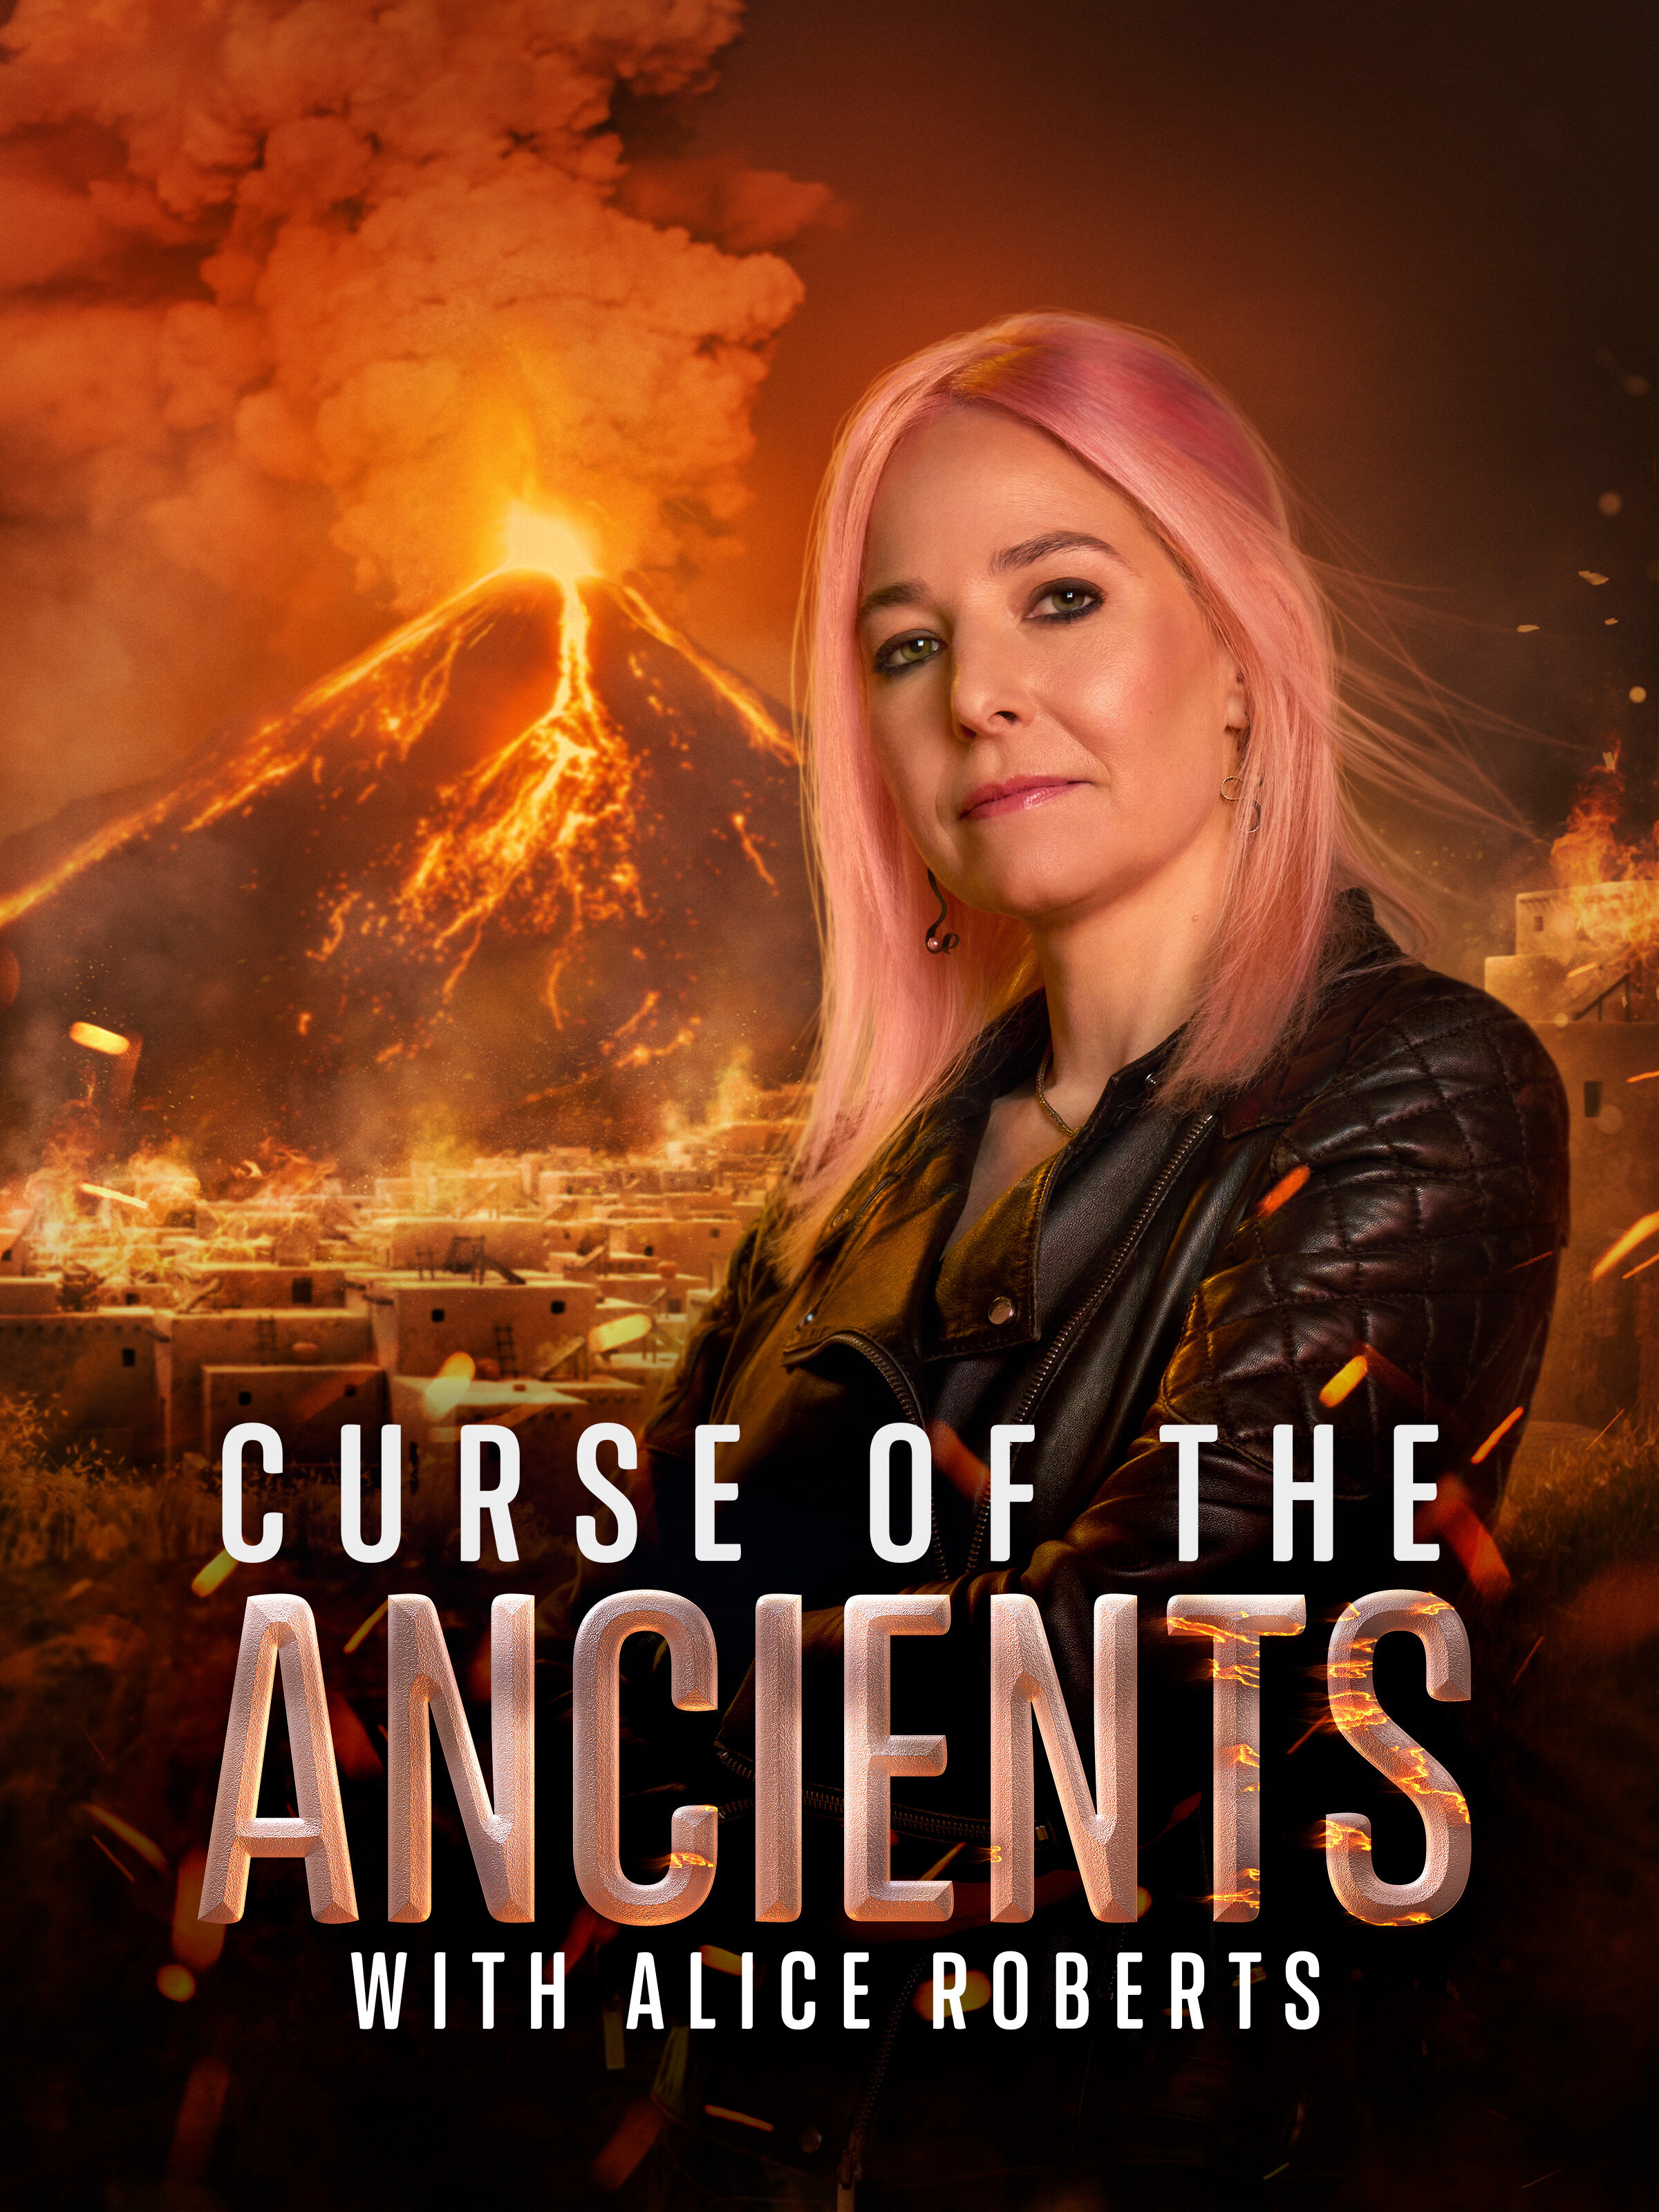 Curse of the Ancients with Alice Roberts ne zaman